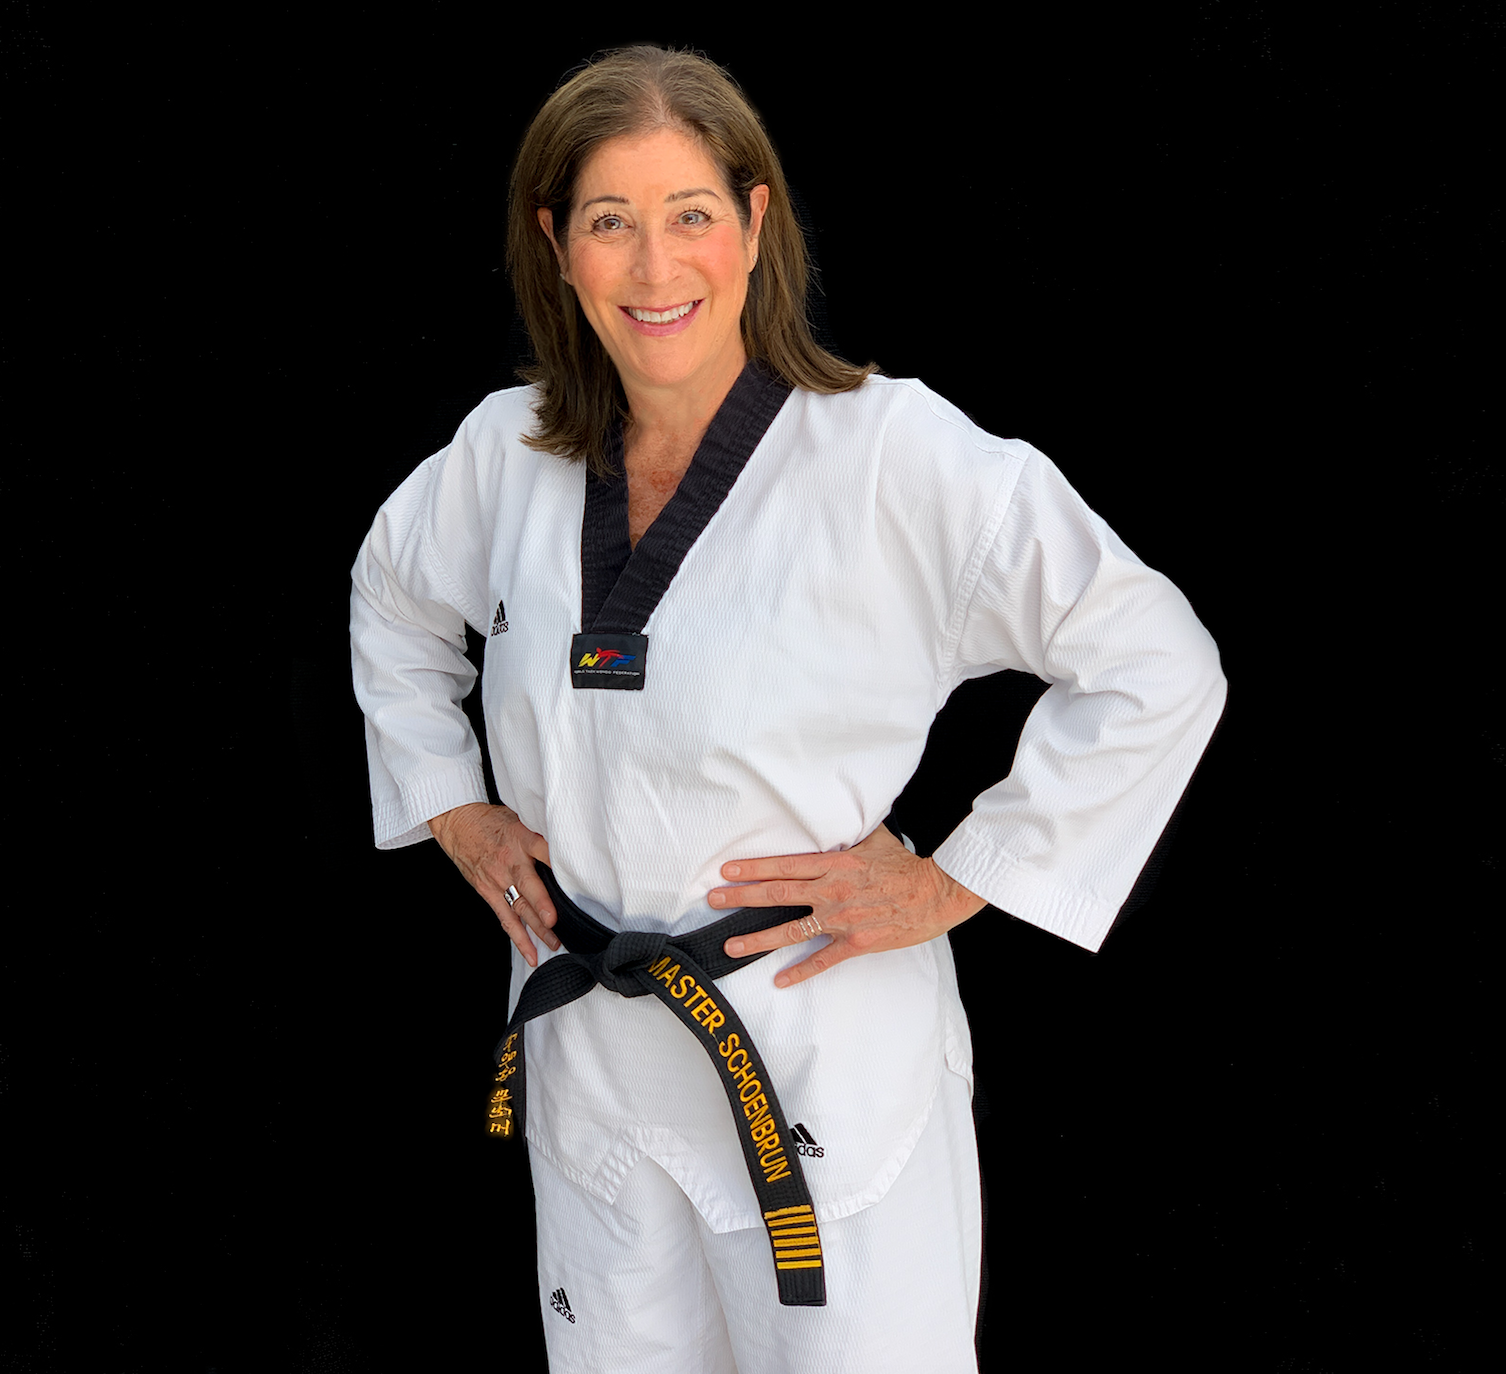 Q&A: Retiring from the Academy, flipping thinking, taekwondo, and tequila